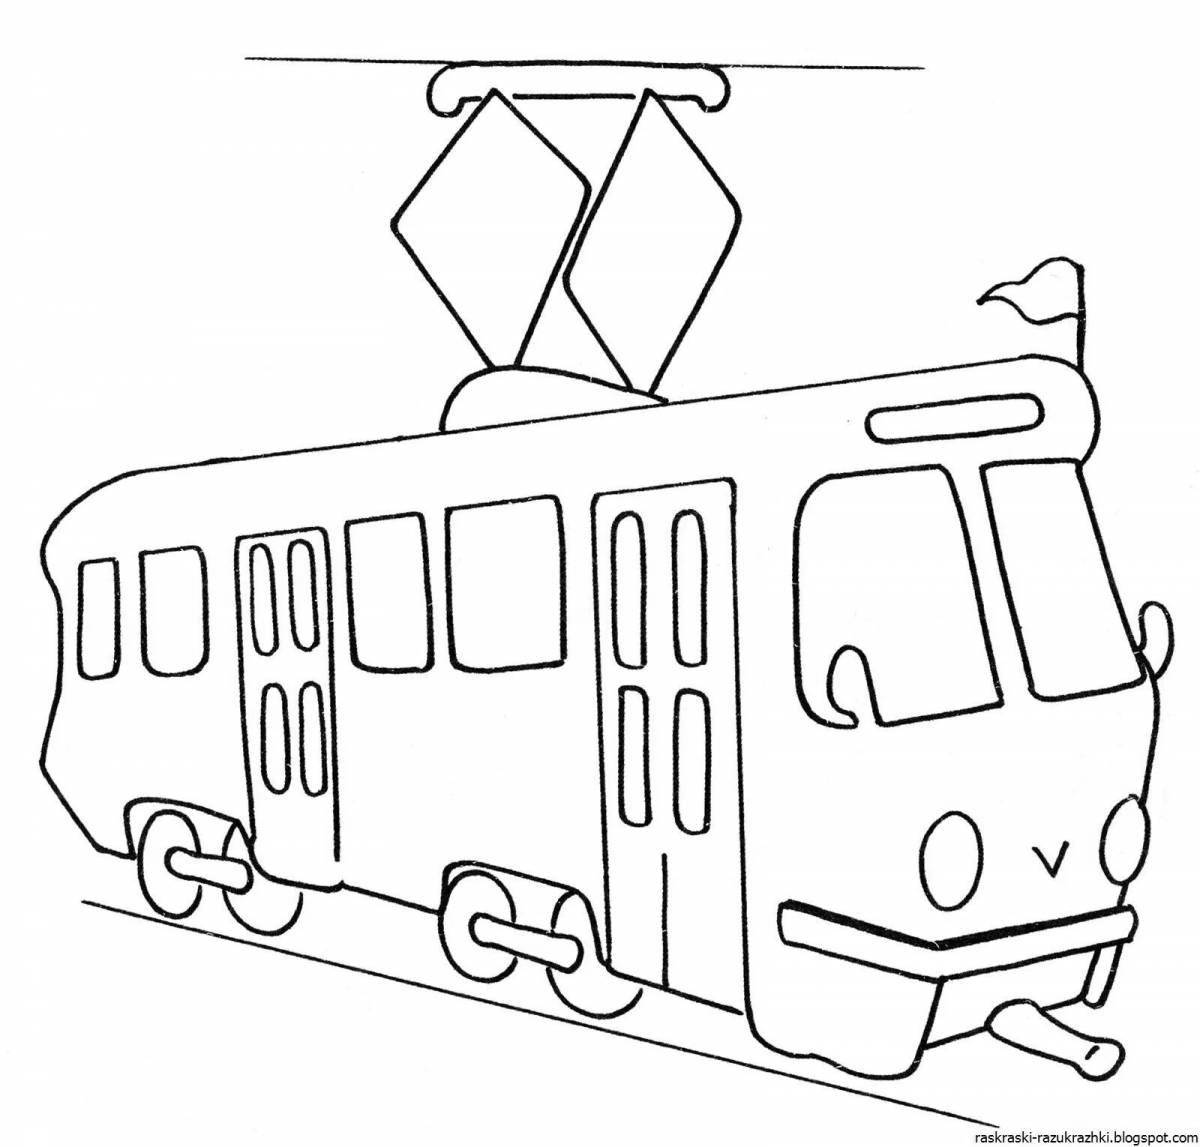 Shiny tram coloring book for kids